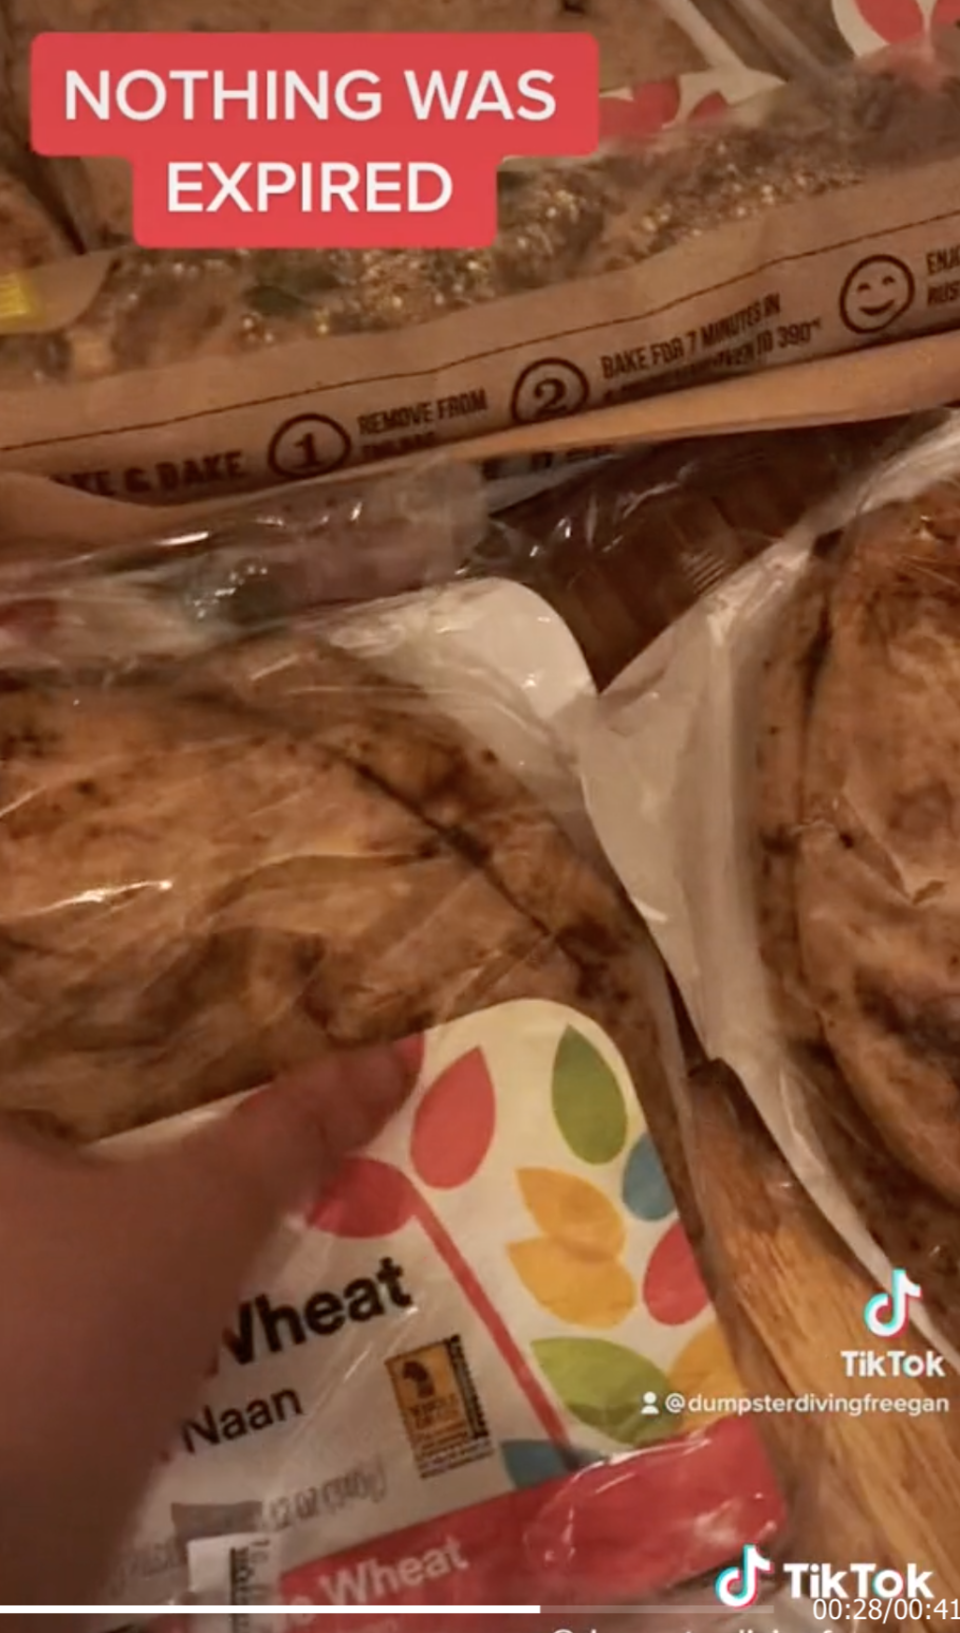 A TikTokker found dozens of Whole Foods food packages that had not expired in a dumpster (Tiktok.com/dumpsterdivingfreegan)